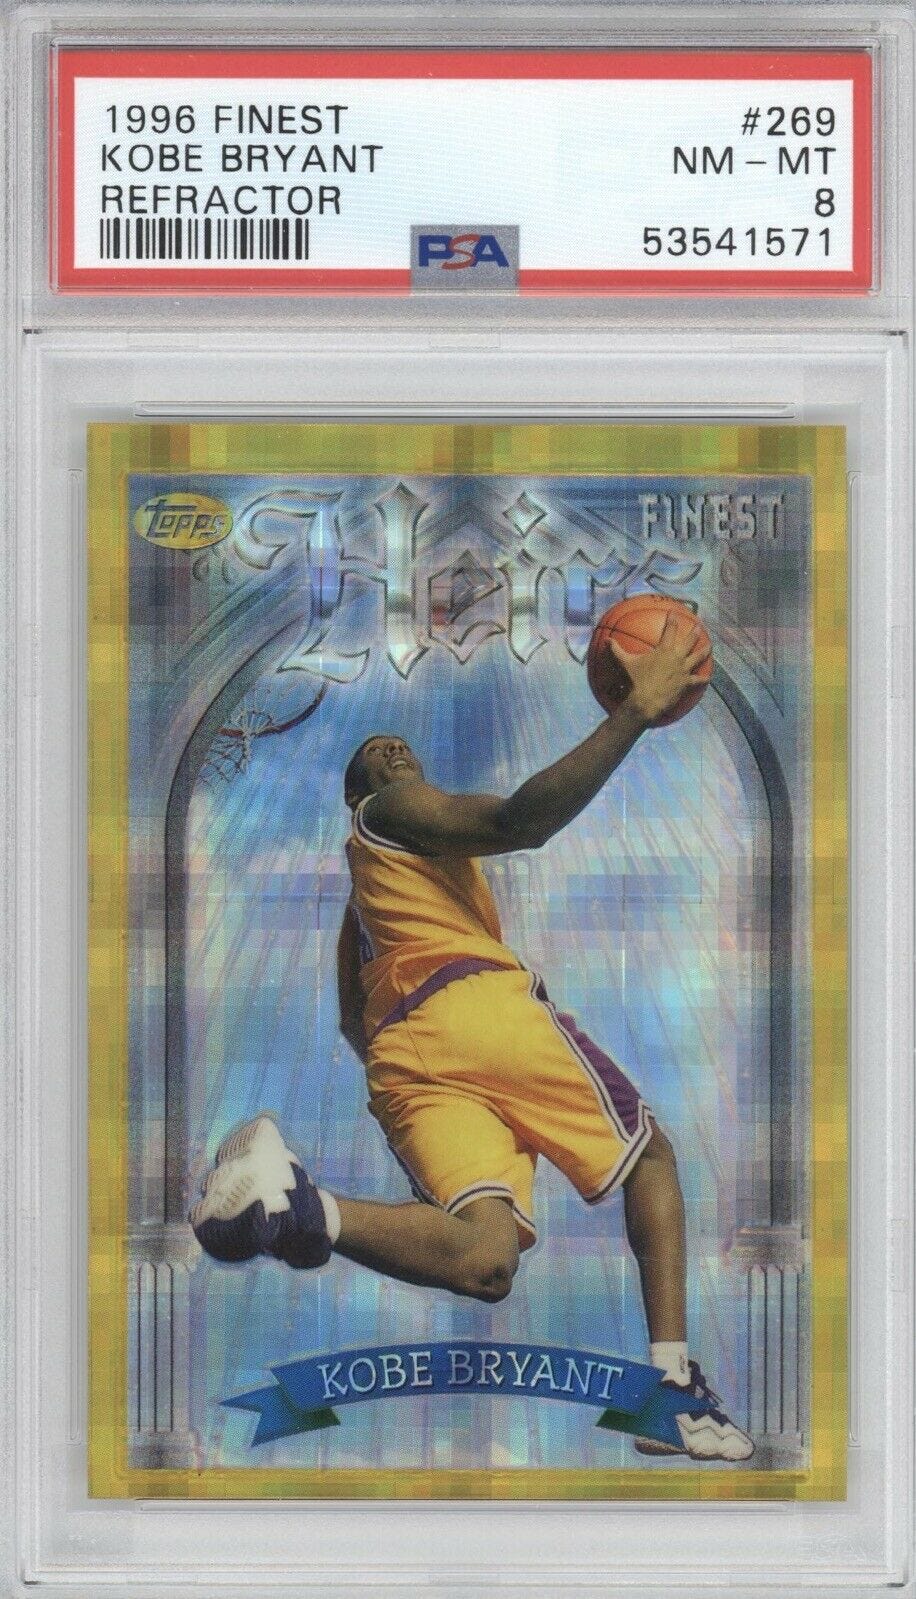 Image 1 - KOBE-BRYANT-PSA-8-1996-TOPPS-FINEST-BASKETBALL-269-HEIRS-GOLD-REFRACTOR-ROOKIE